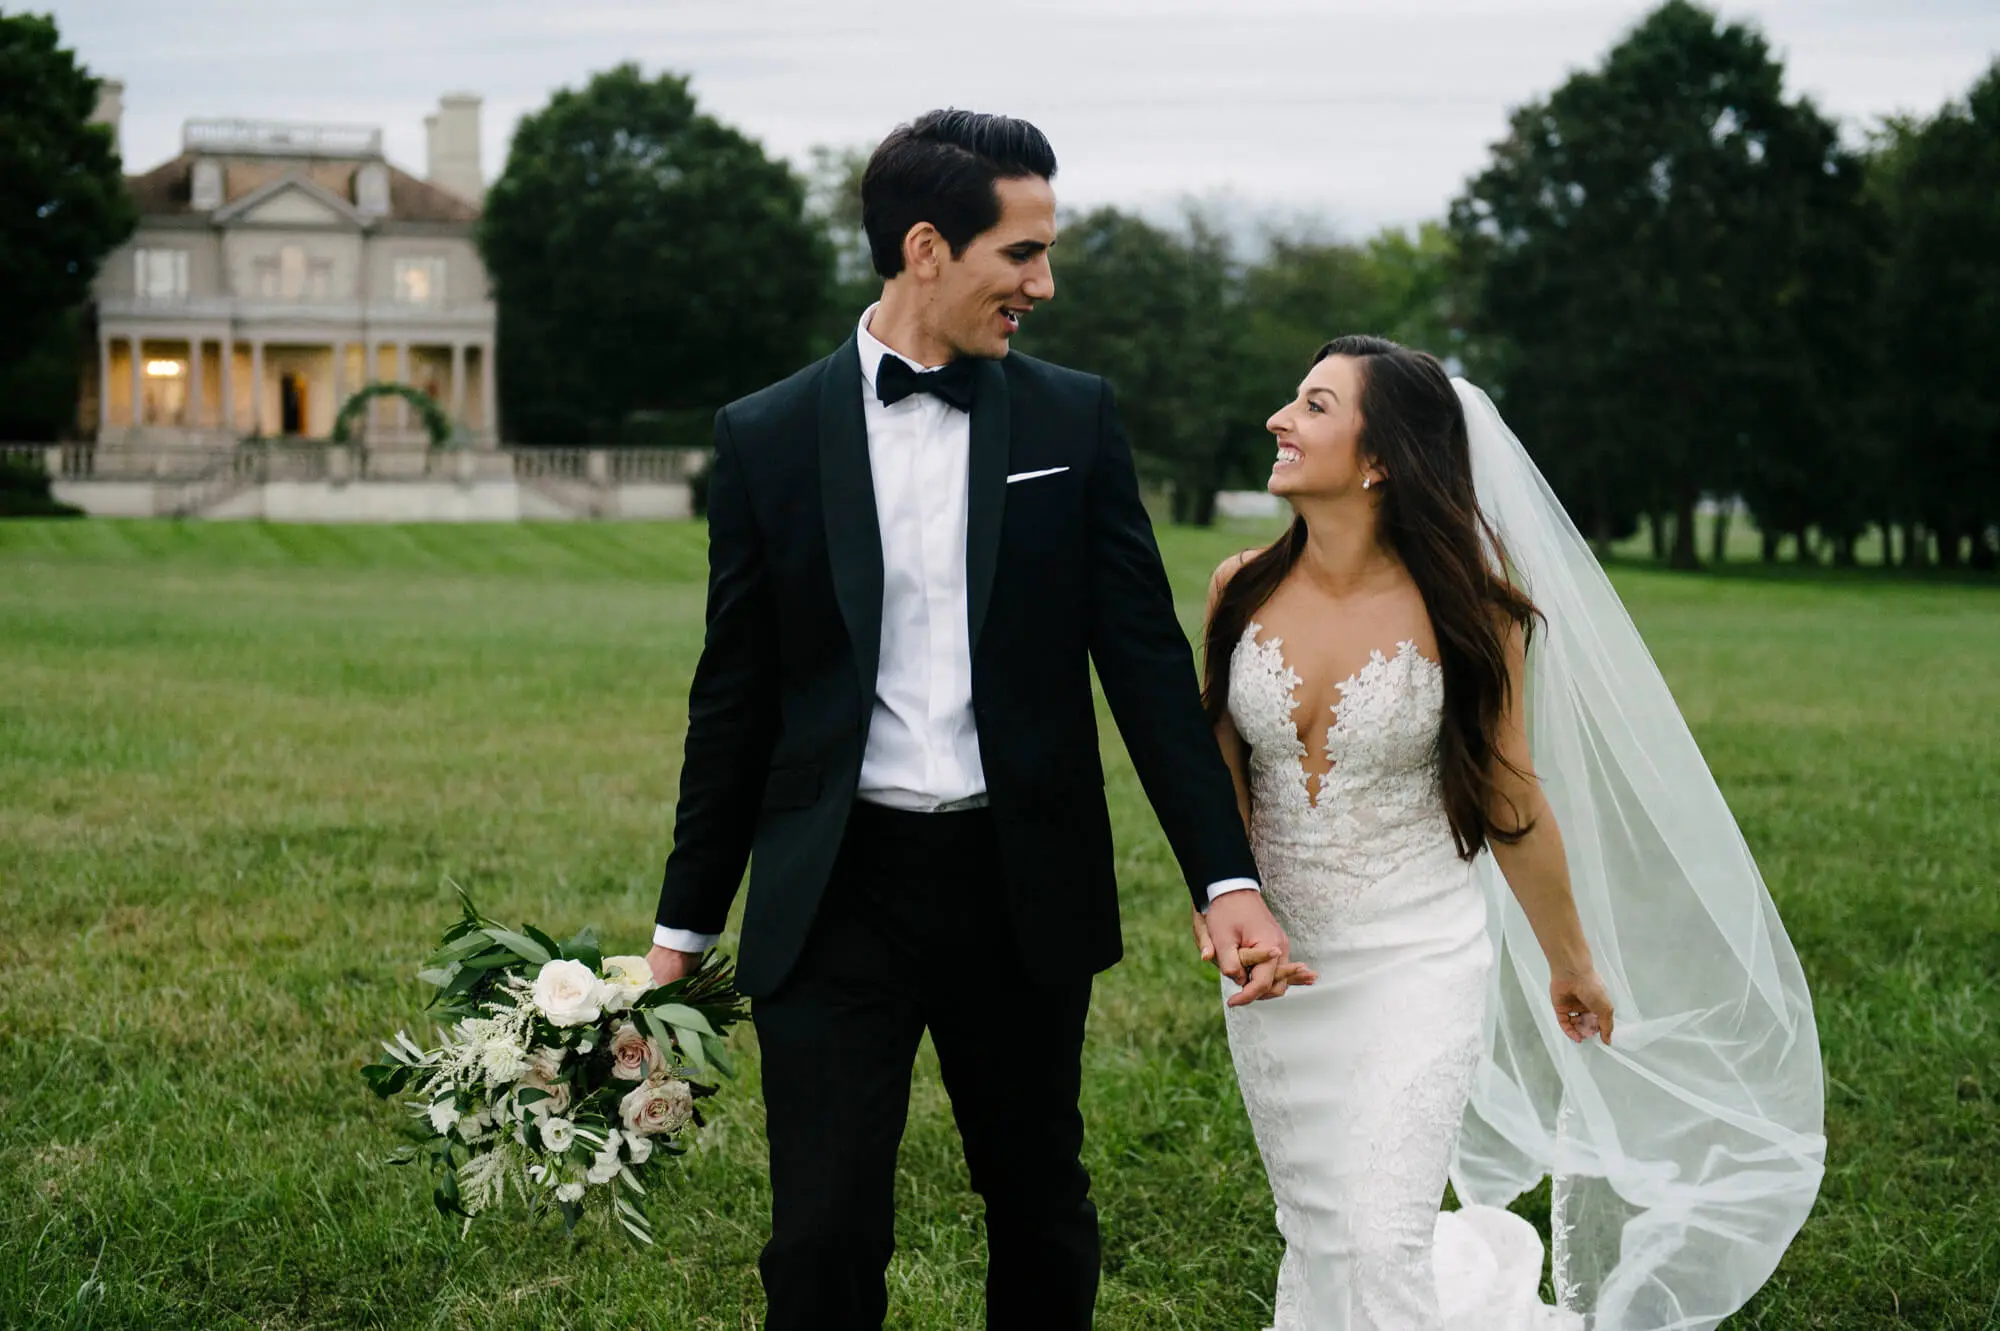 Husband and wife stroll the grounds of Great Marsh Estate after their classic destination wedding.